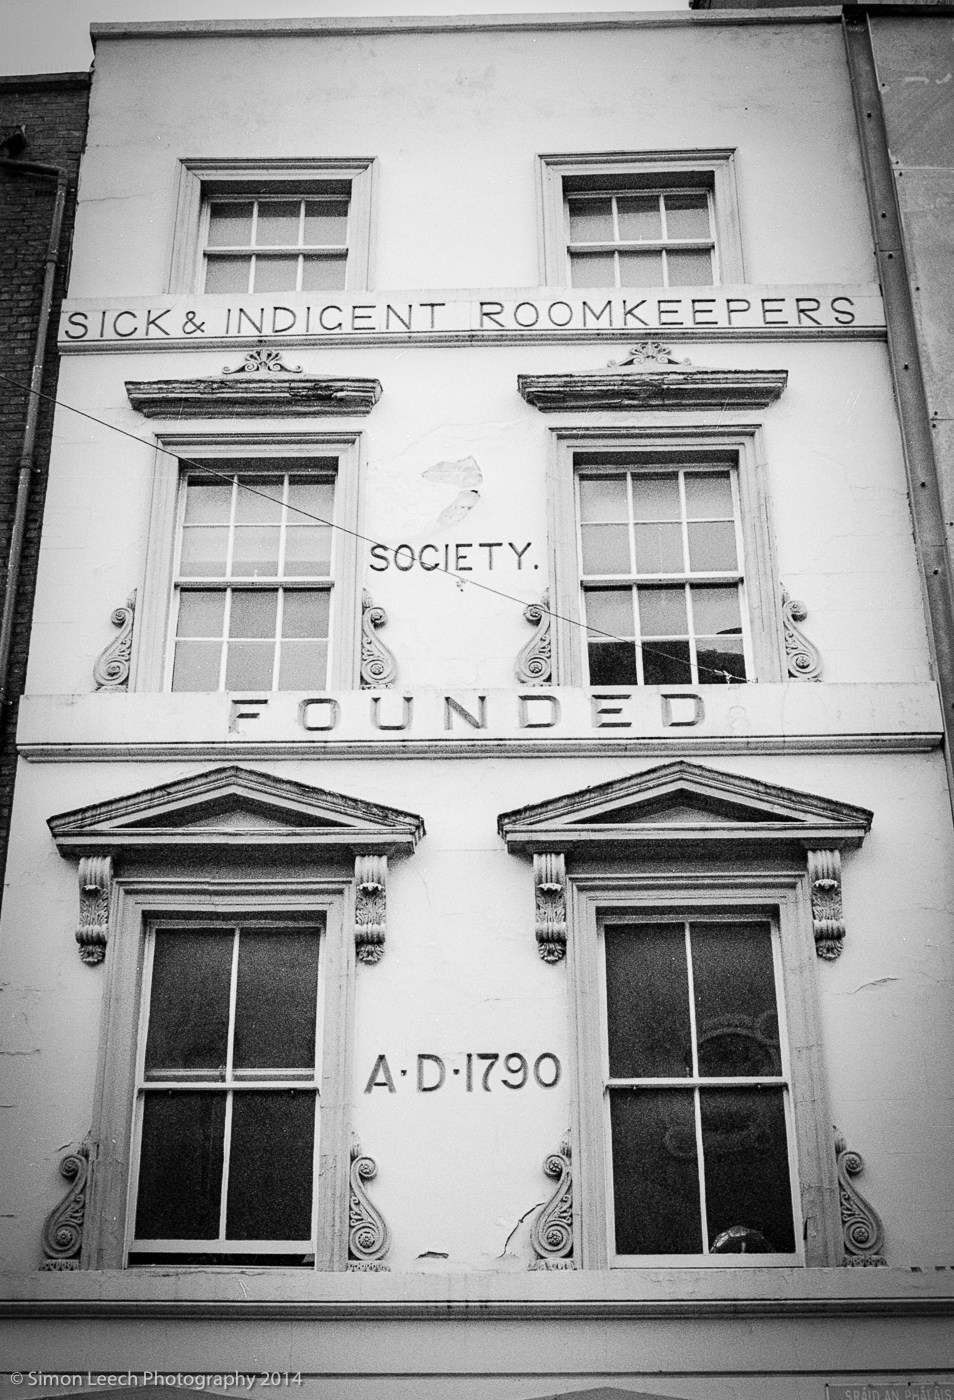 Sick and Incident Roomkeepers Society